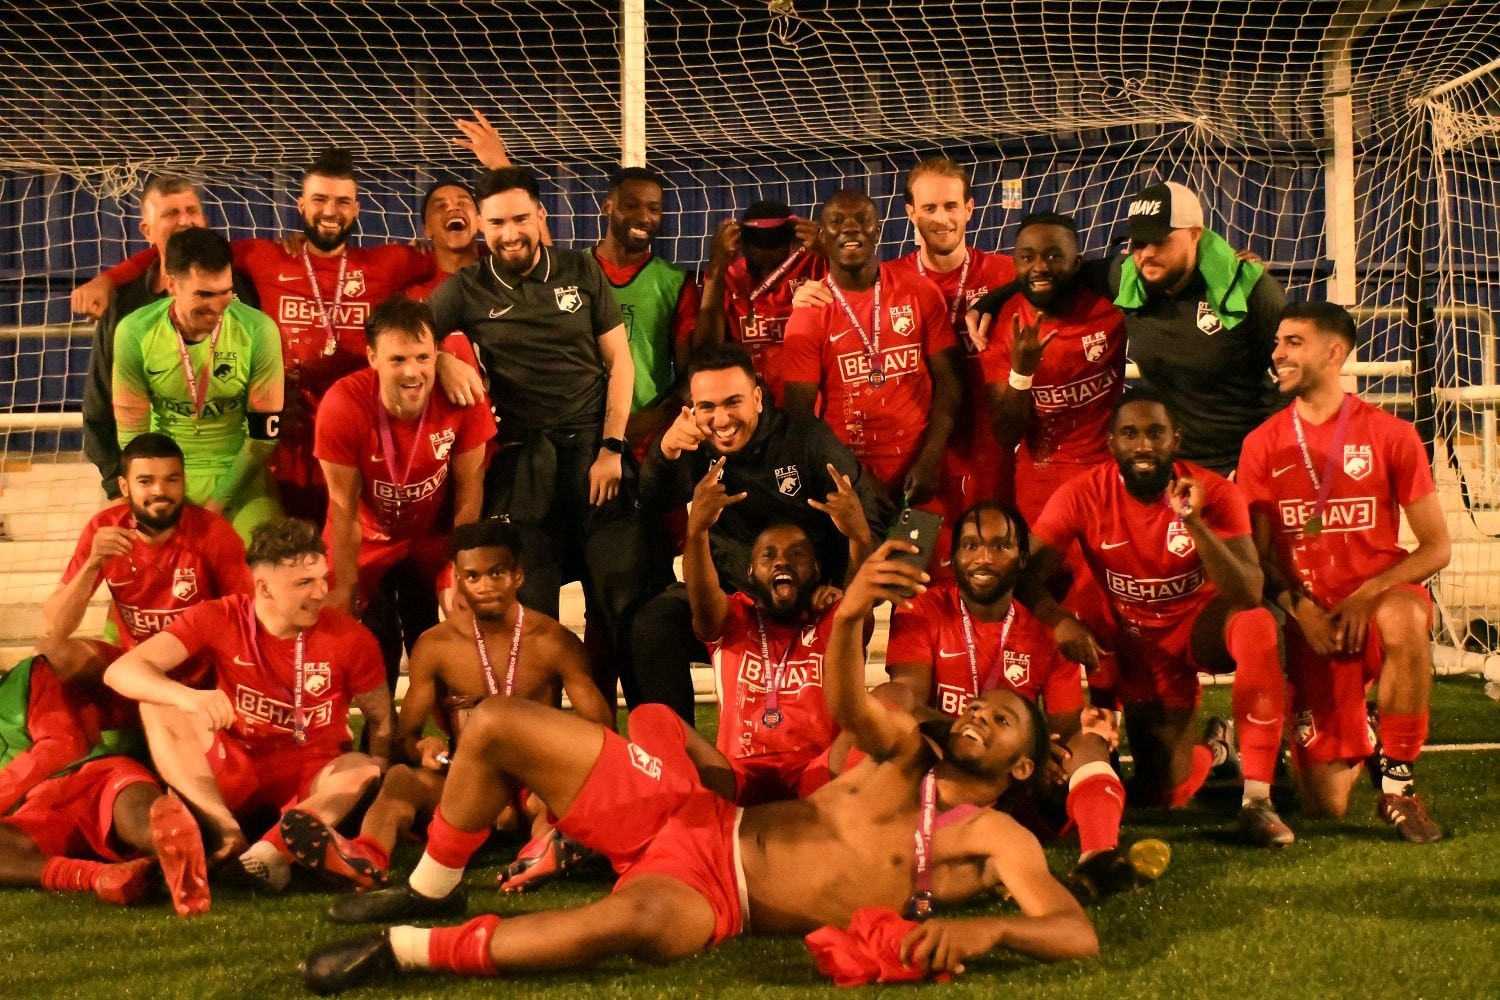 DTFC come from behind to win Play Off Final